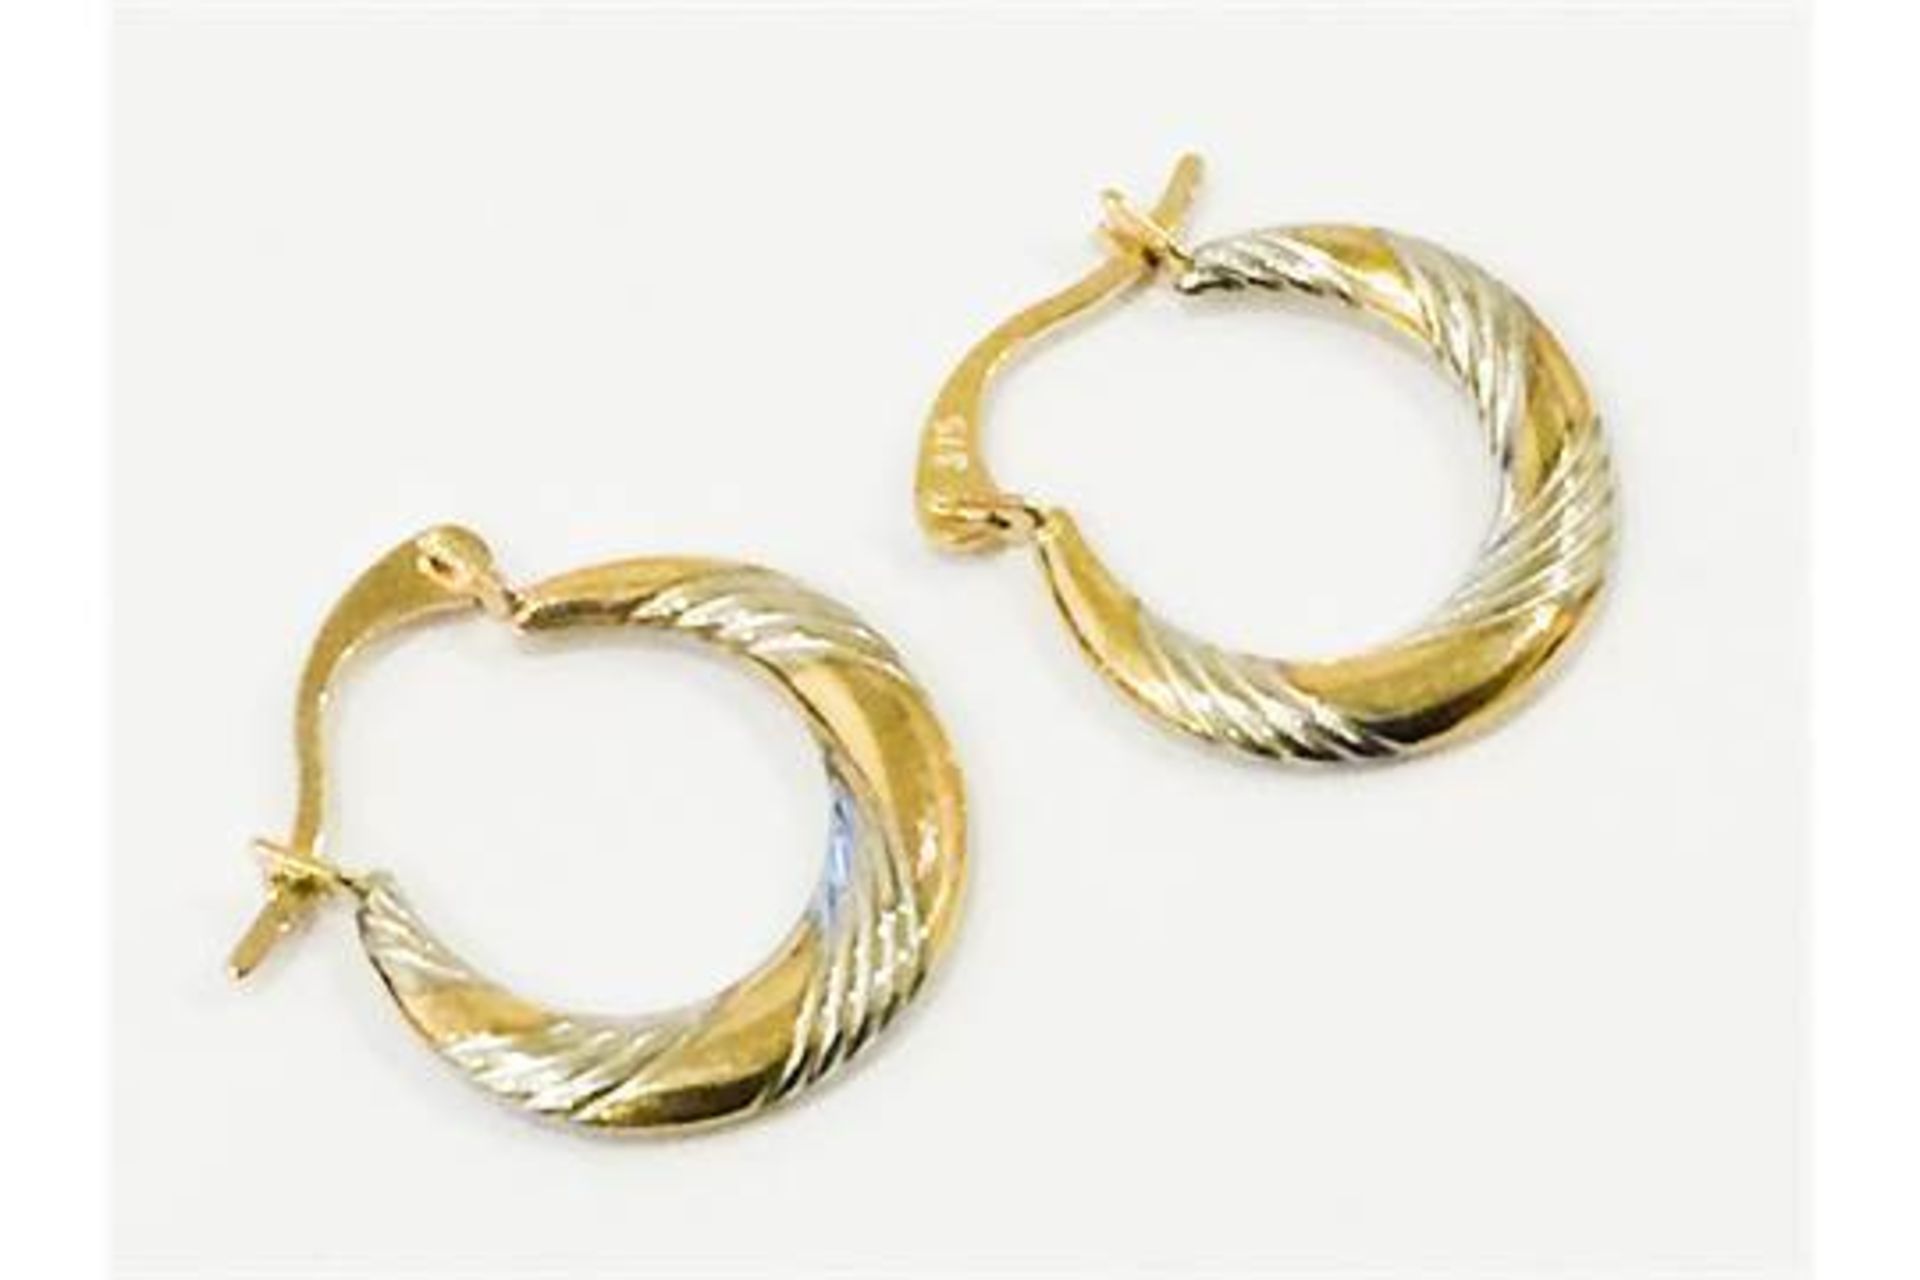 BRAND NEW 9CT TWO TONE HOOP EARRINGS, WHITE AND YELLOW GOLD RRP-£89.99 (SBW)